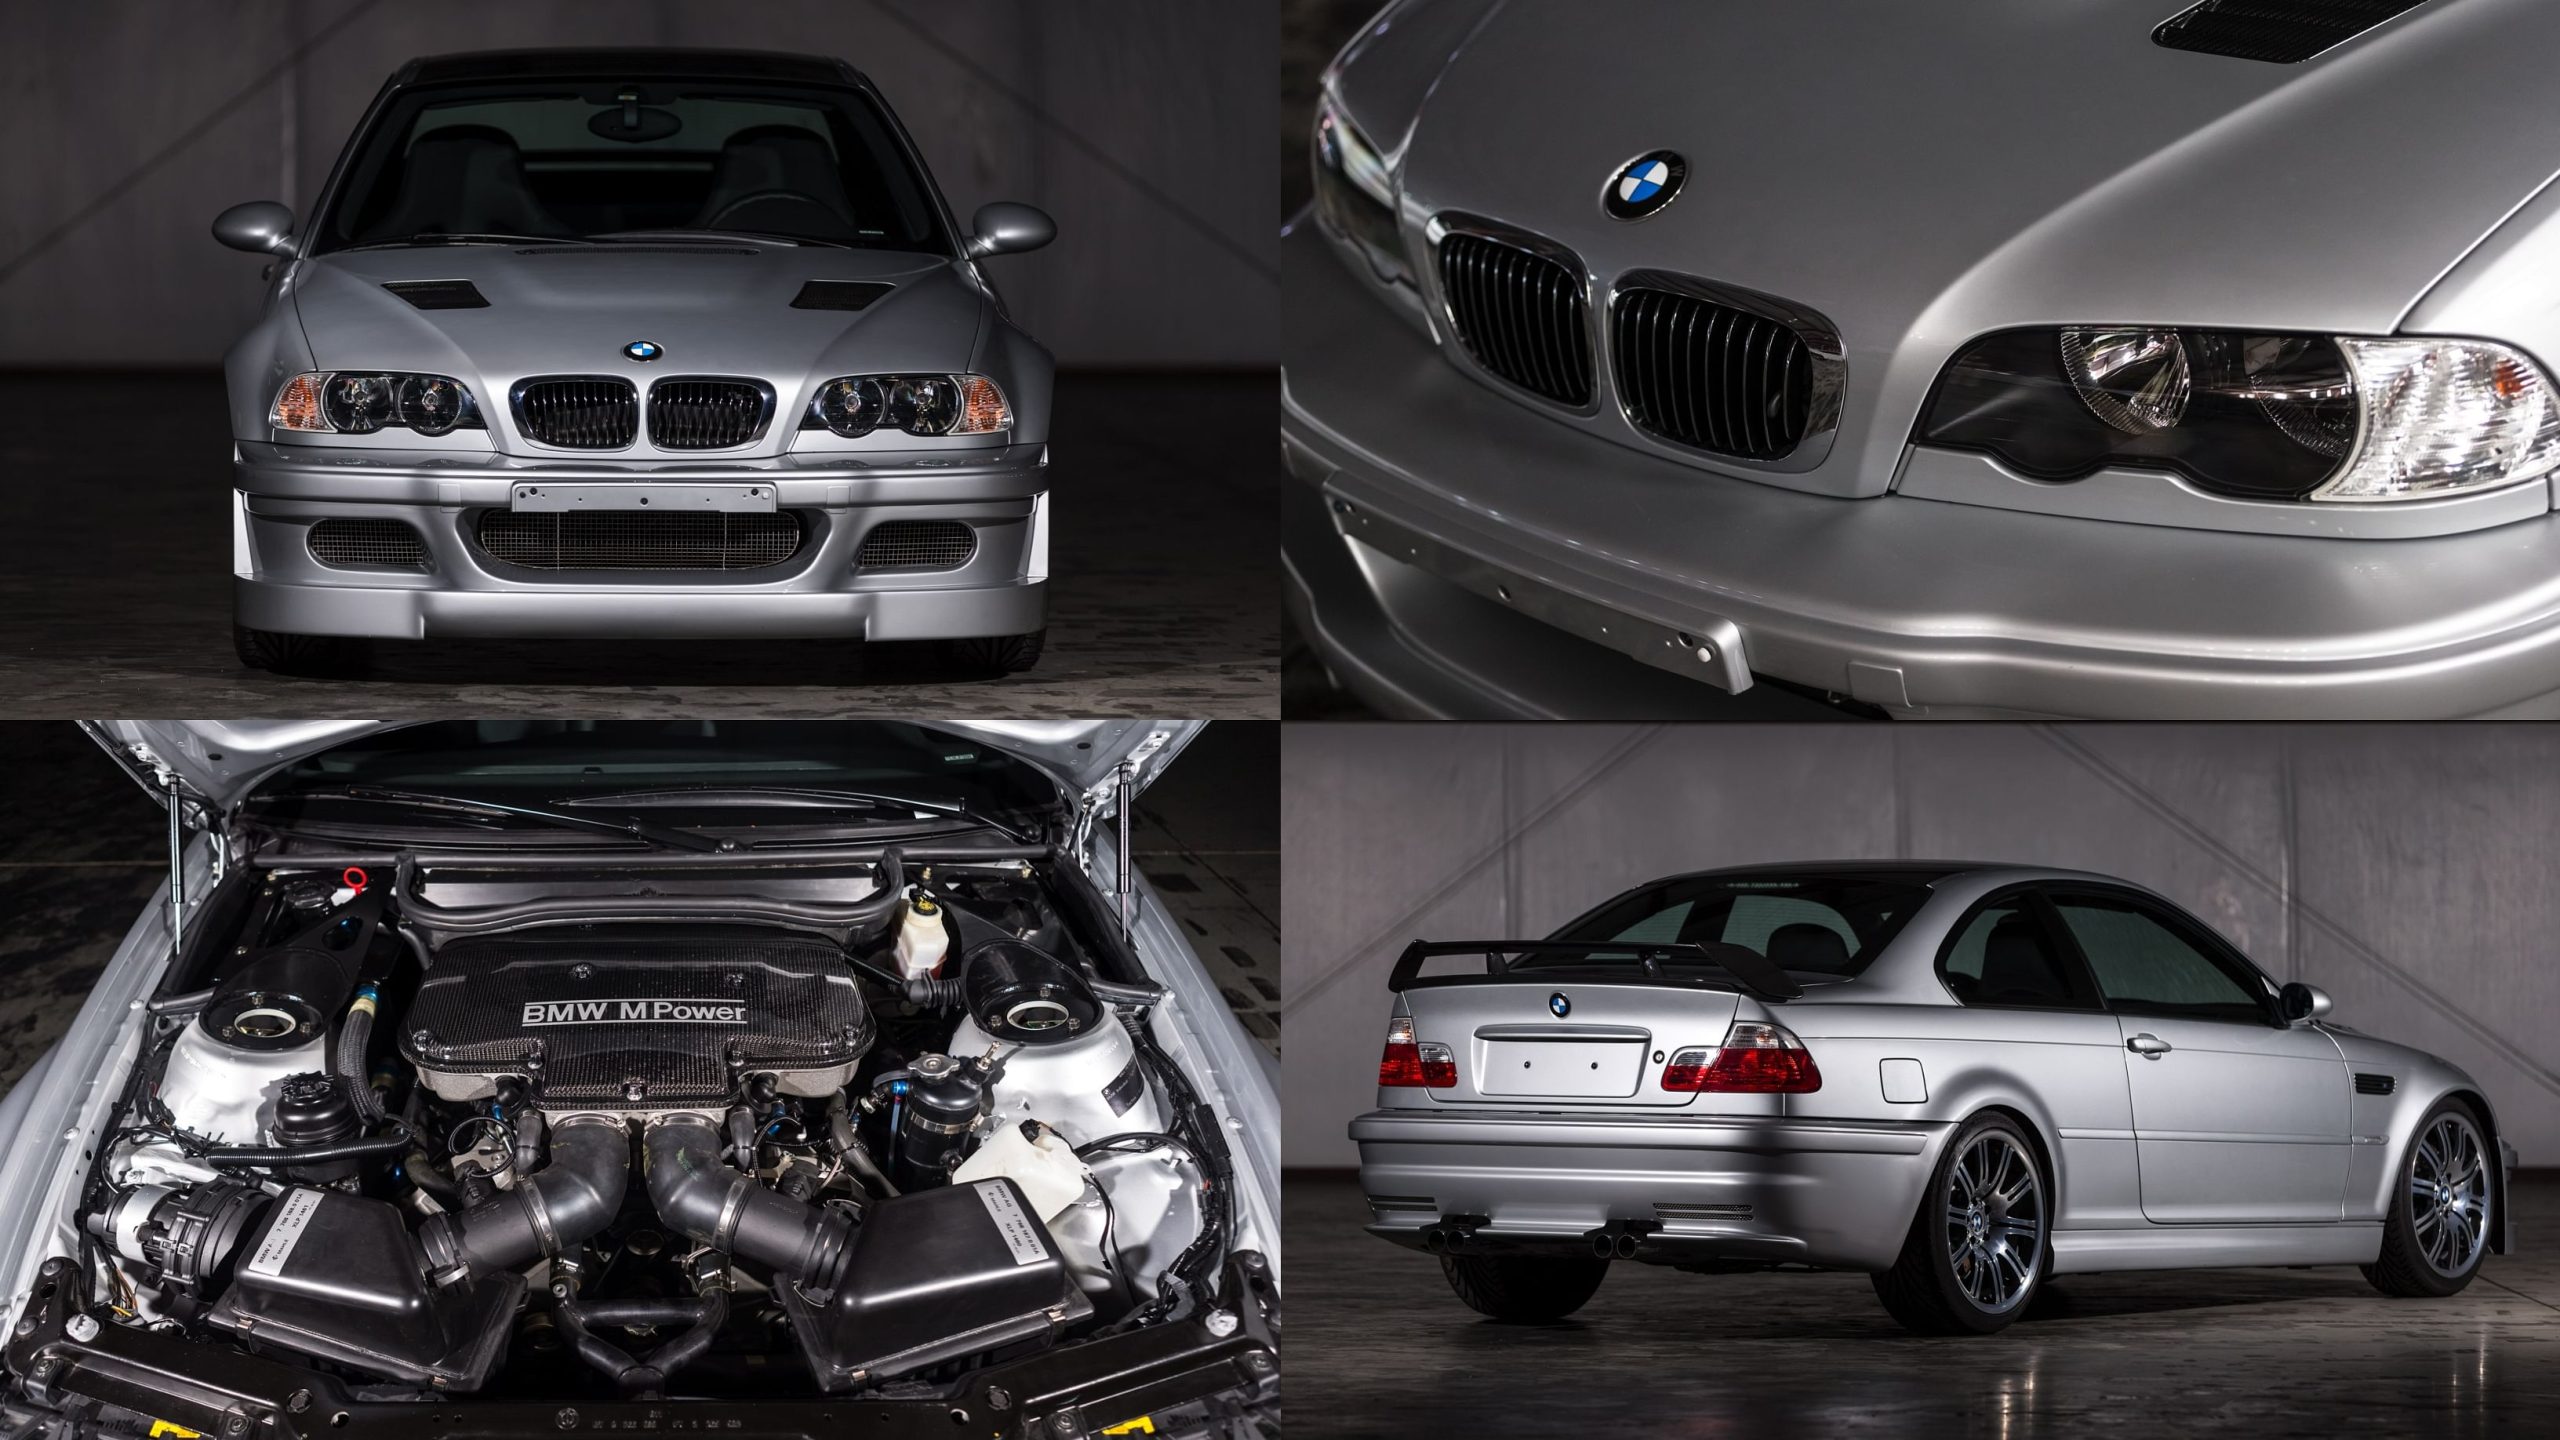 BMW E46 M3 GTR - front, rear, front grille, engine